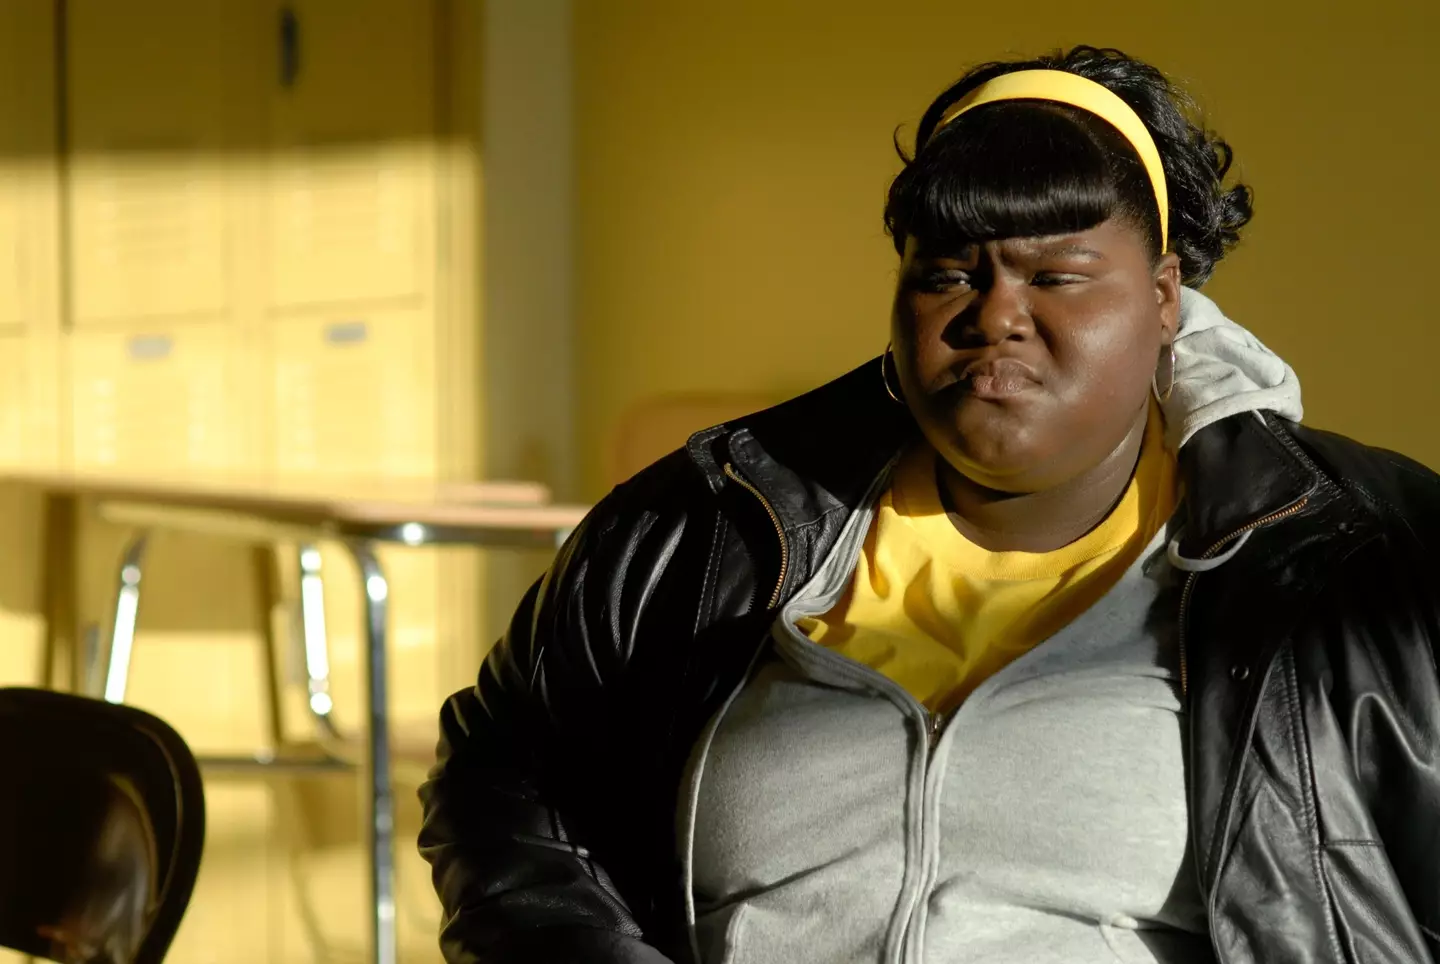 It's reported that Kathy mistook Lizzo for Gabourey Sidibe's character in the Oscar-winning movie Precious.